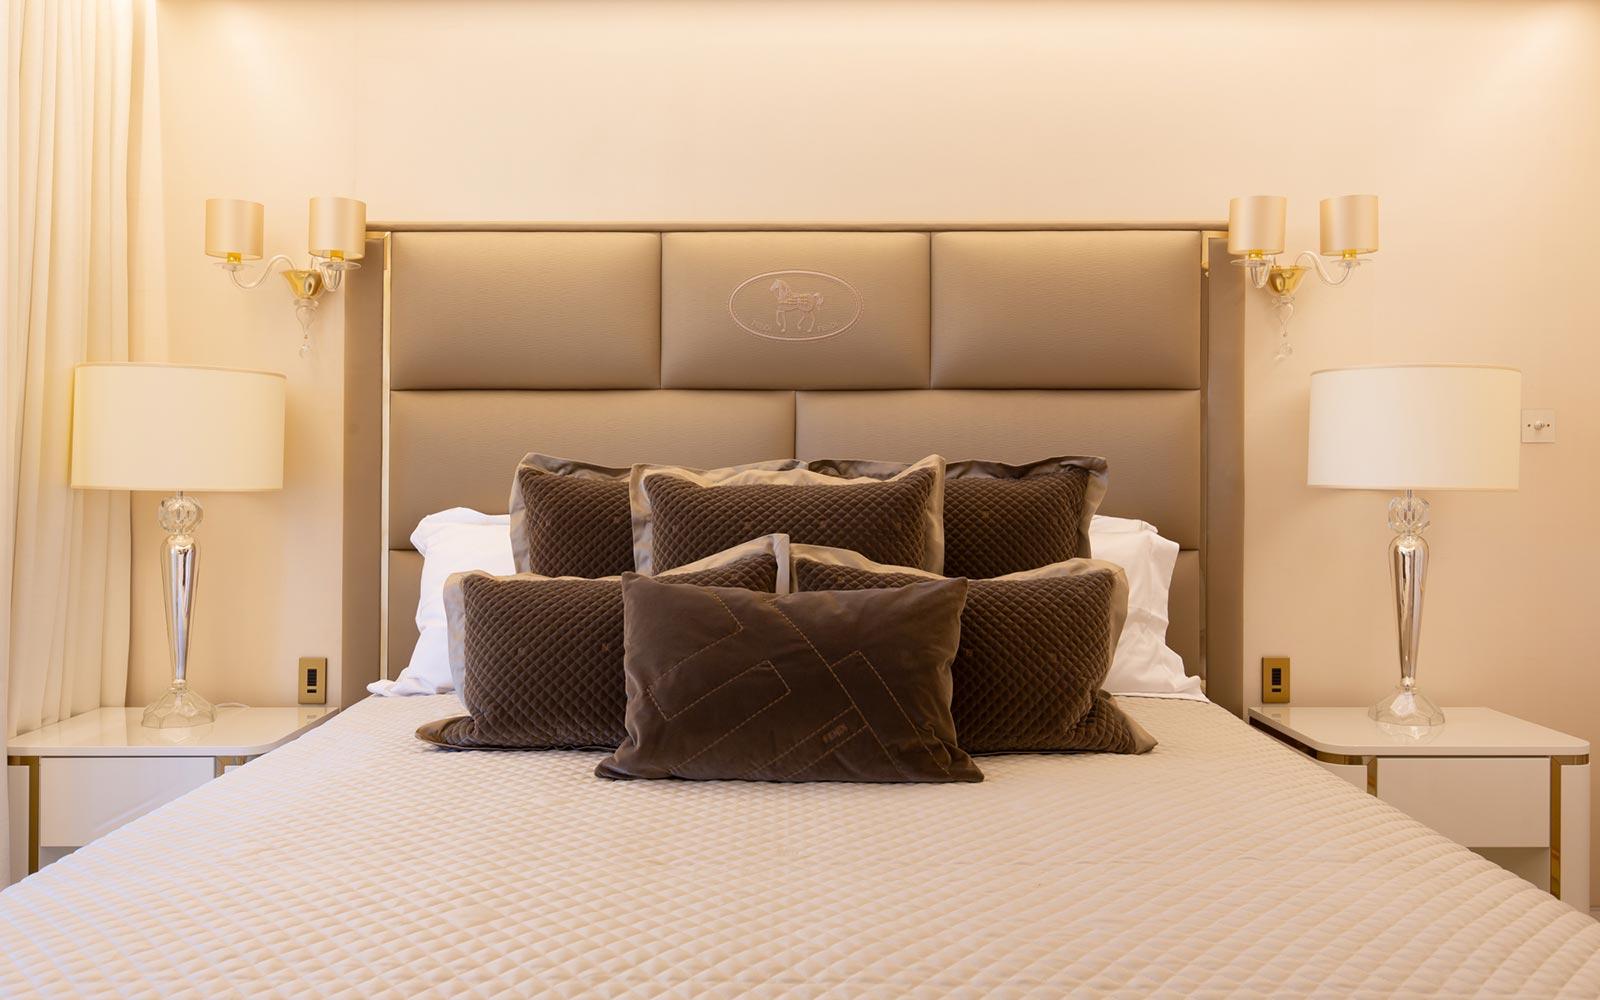 Luxury London’s property of the month - A Fendi designed apartment next to Kensington Palace